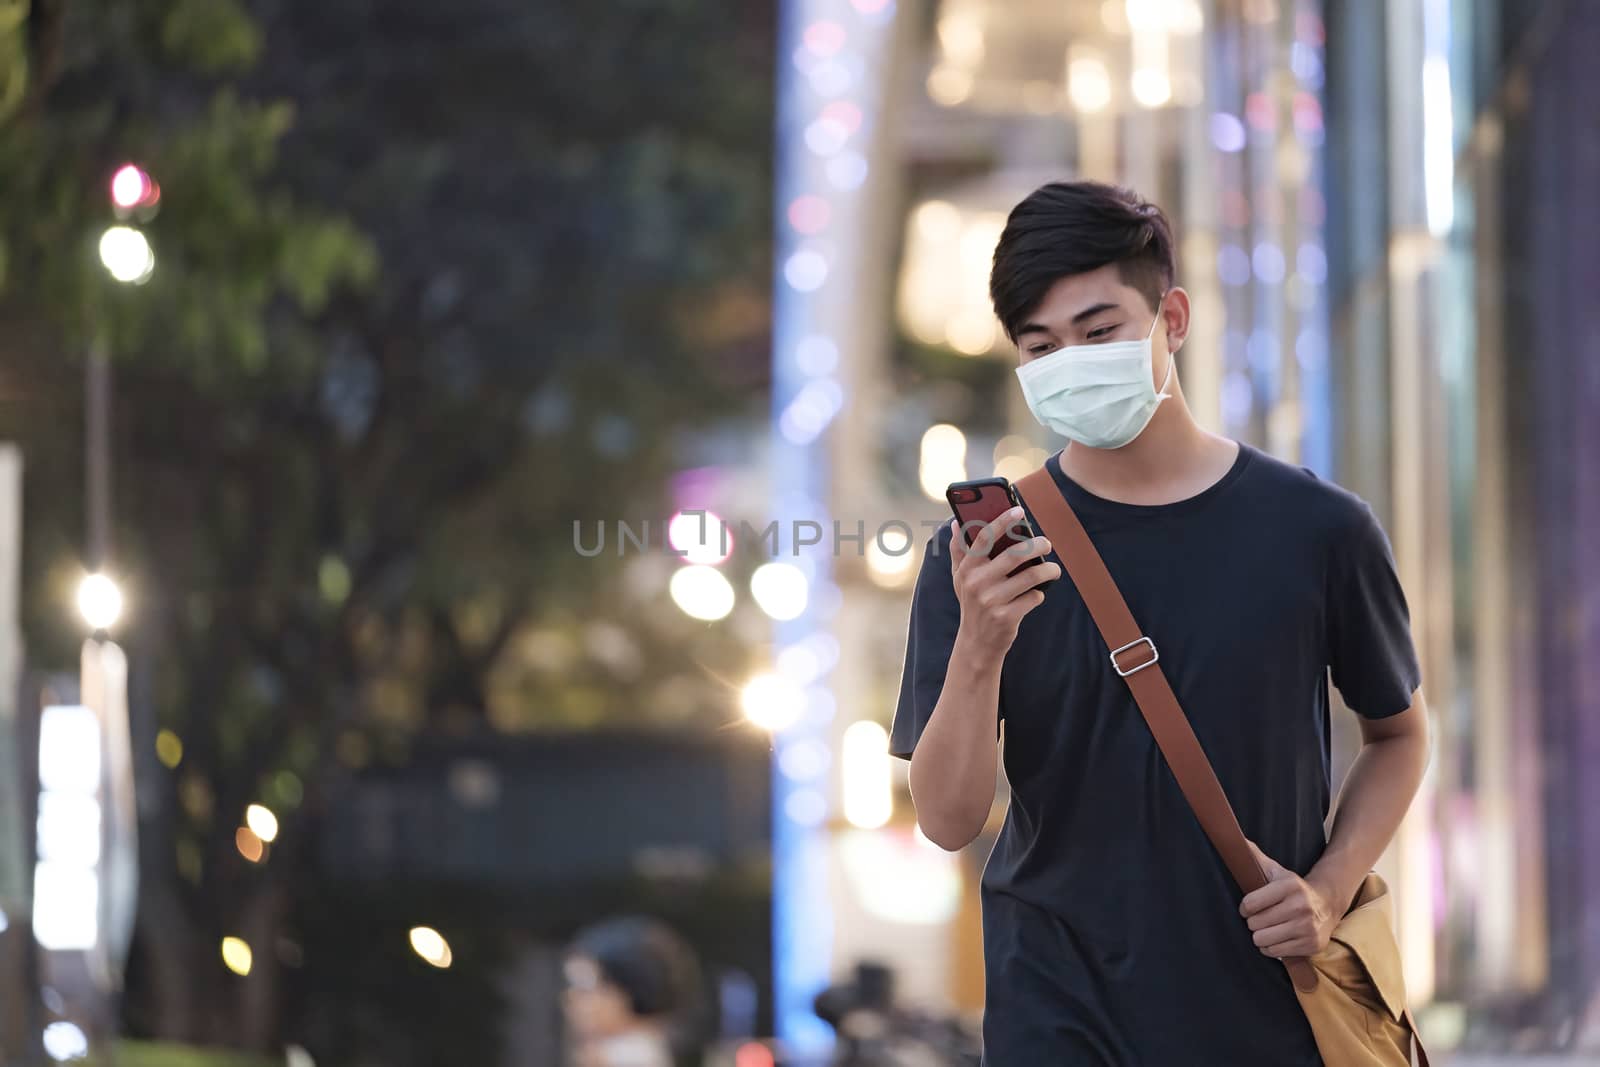 Young man with protective face mask using mobile phone in downtown city street prevent from the spread of viruses in the city. New normal concept.